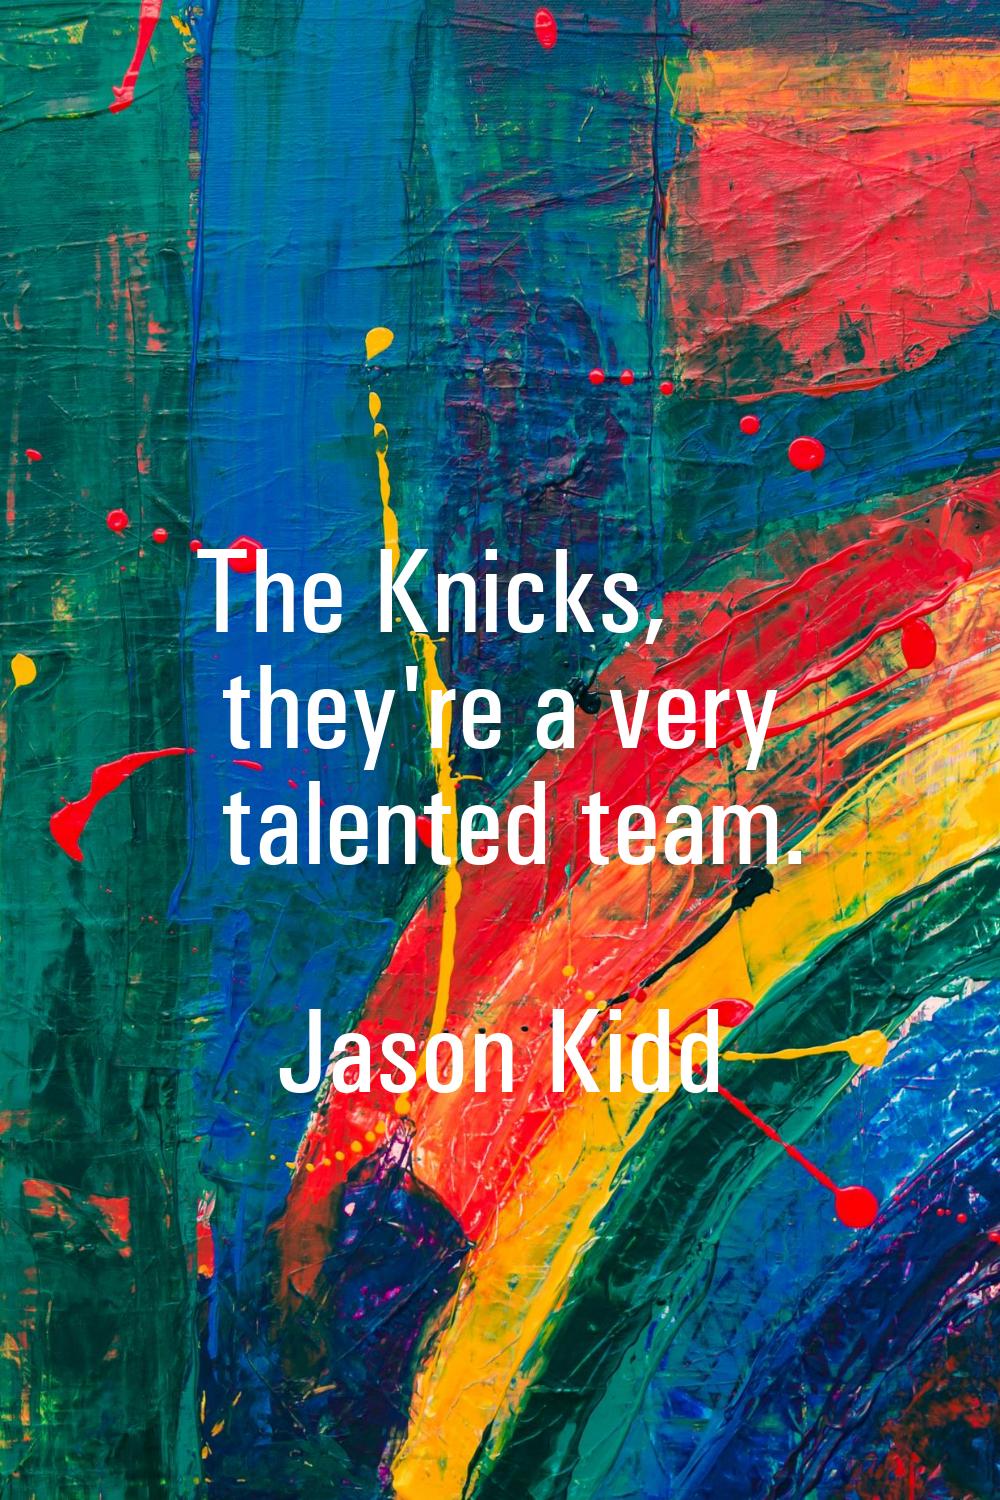 The Knicks, they're a very talented team.